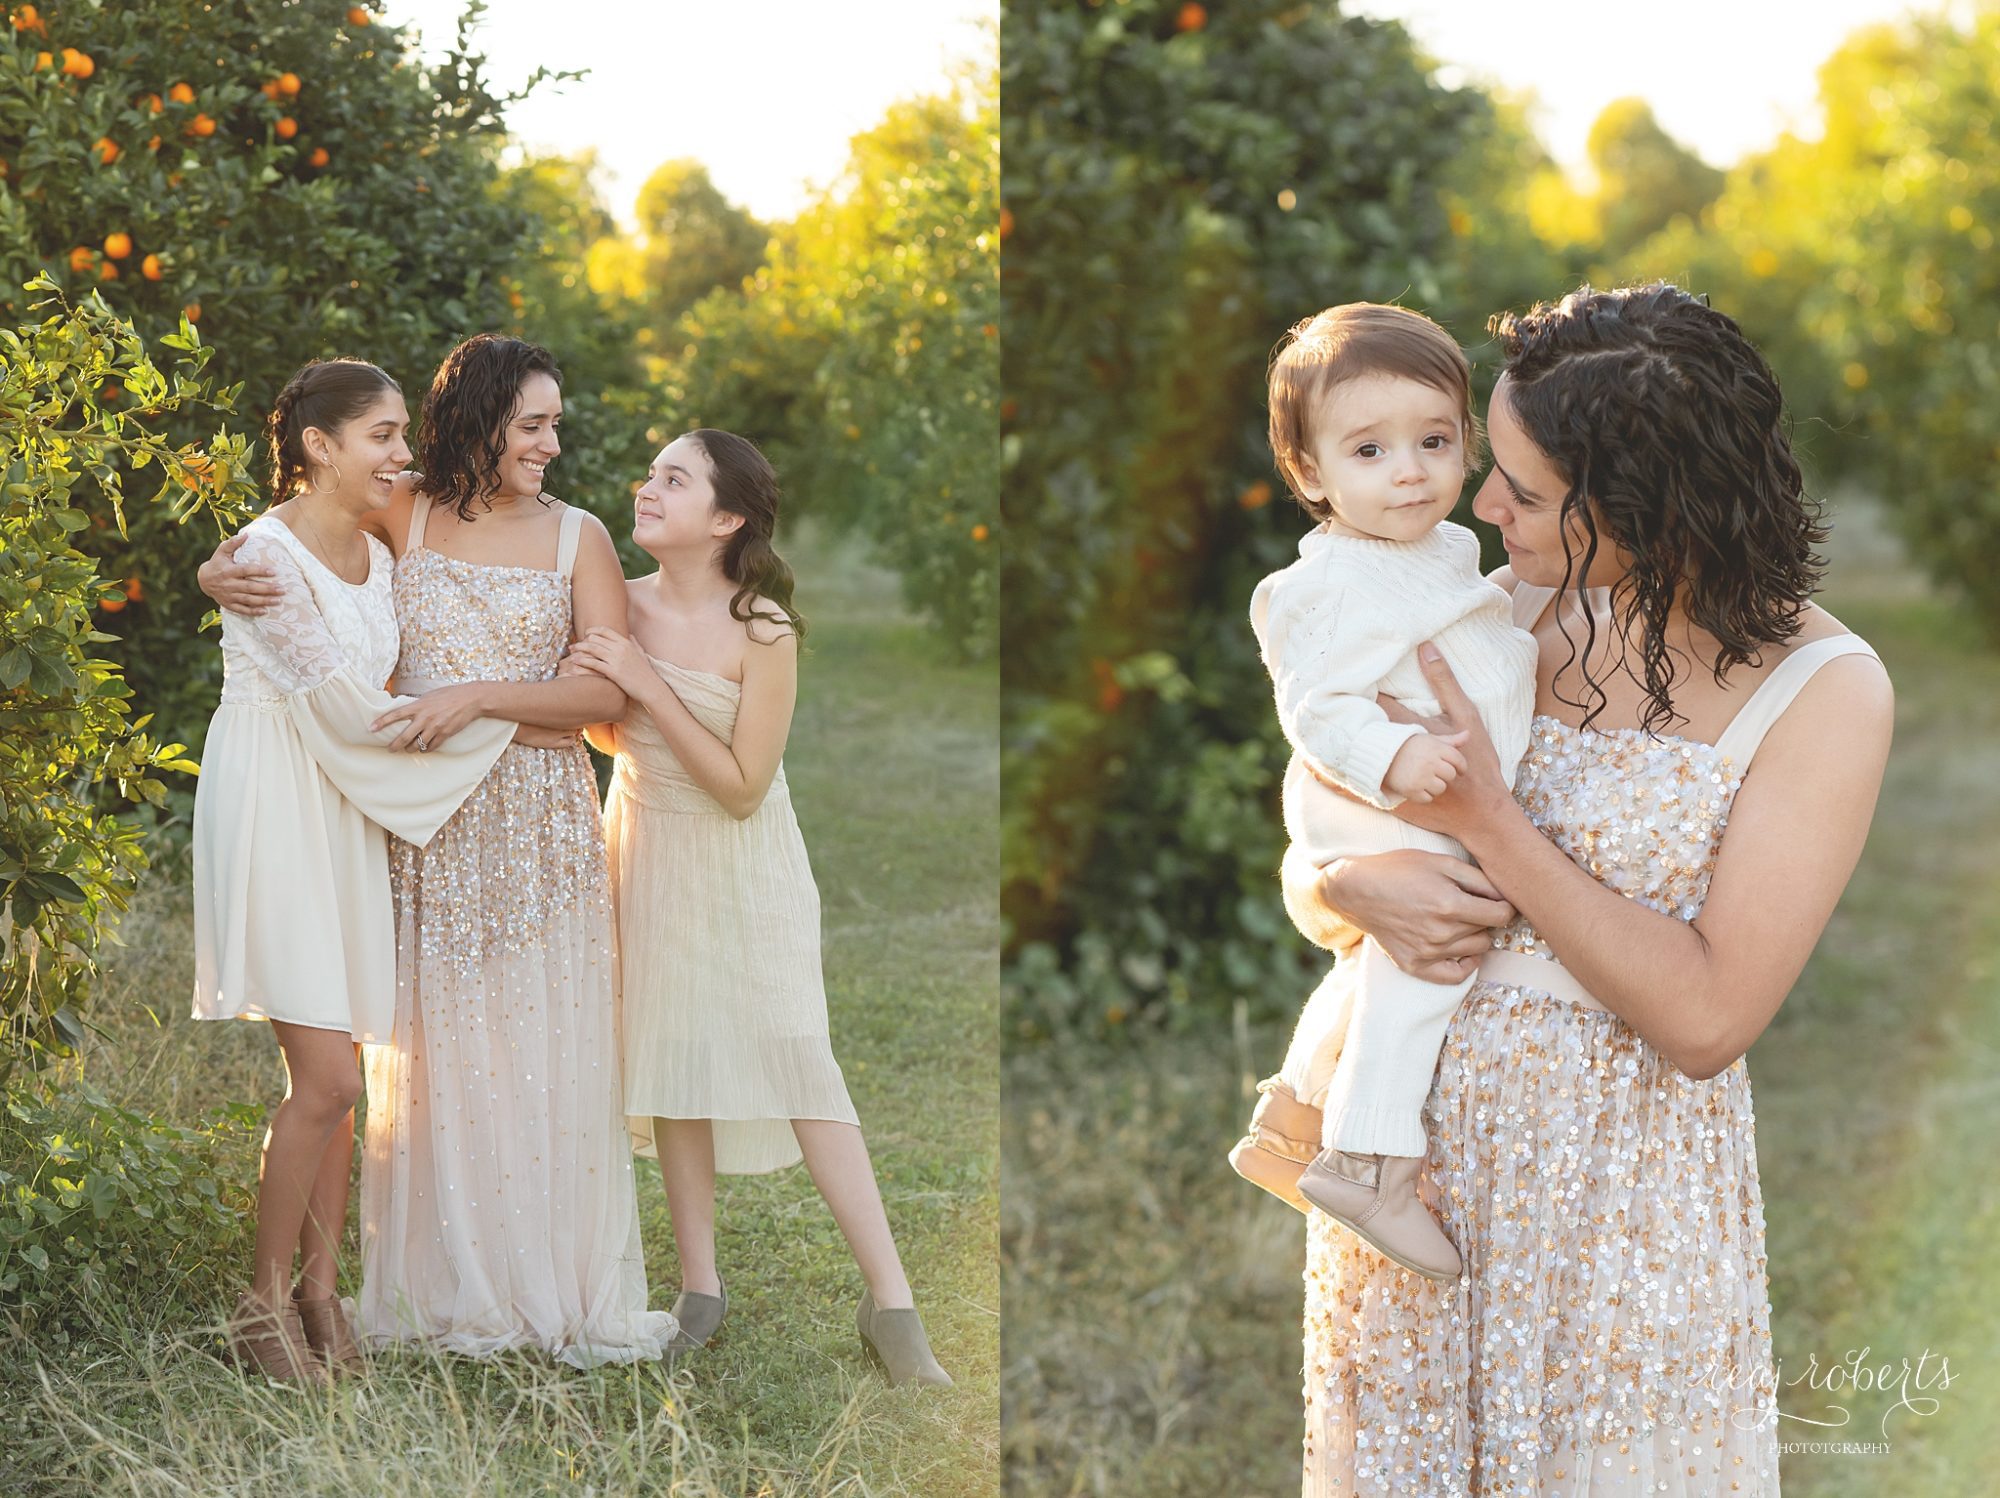 Mother with children in orange grove filed dressed in neutral clothing | Phoenix Family Photographer | Reaj Roberts Photography